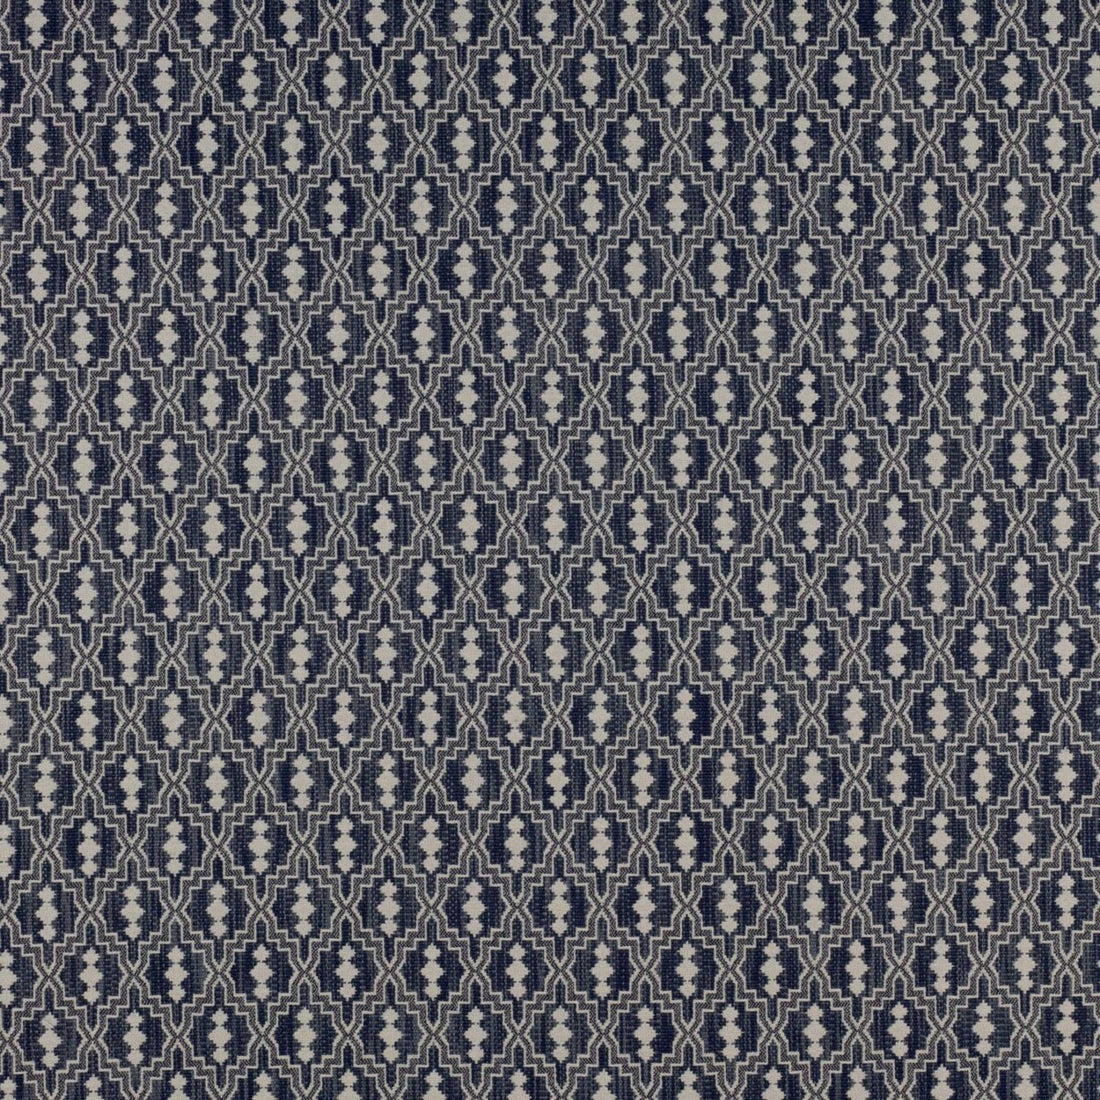 Aztec fabric in azul marino color - pattern GDT5152.006.0 - by Gaston y Daniela in the Gaston Uptown collection